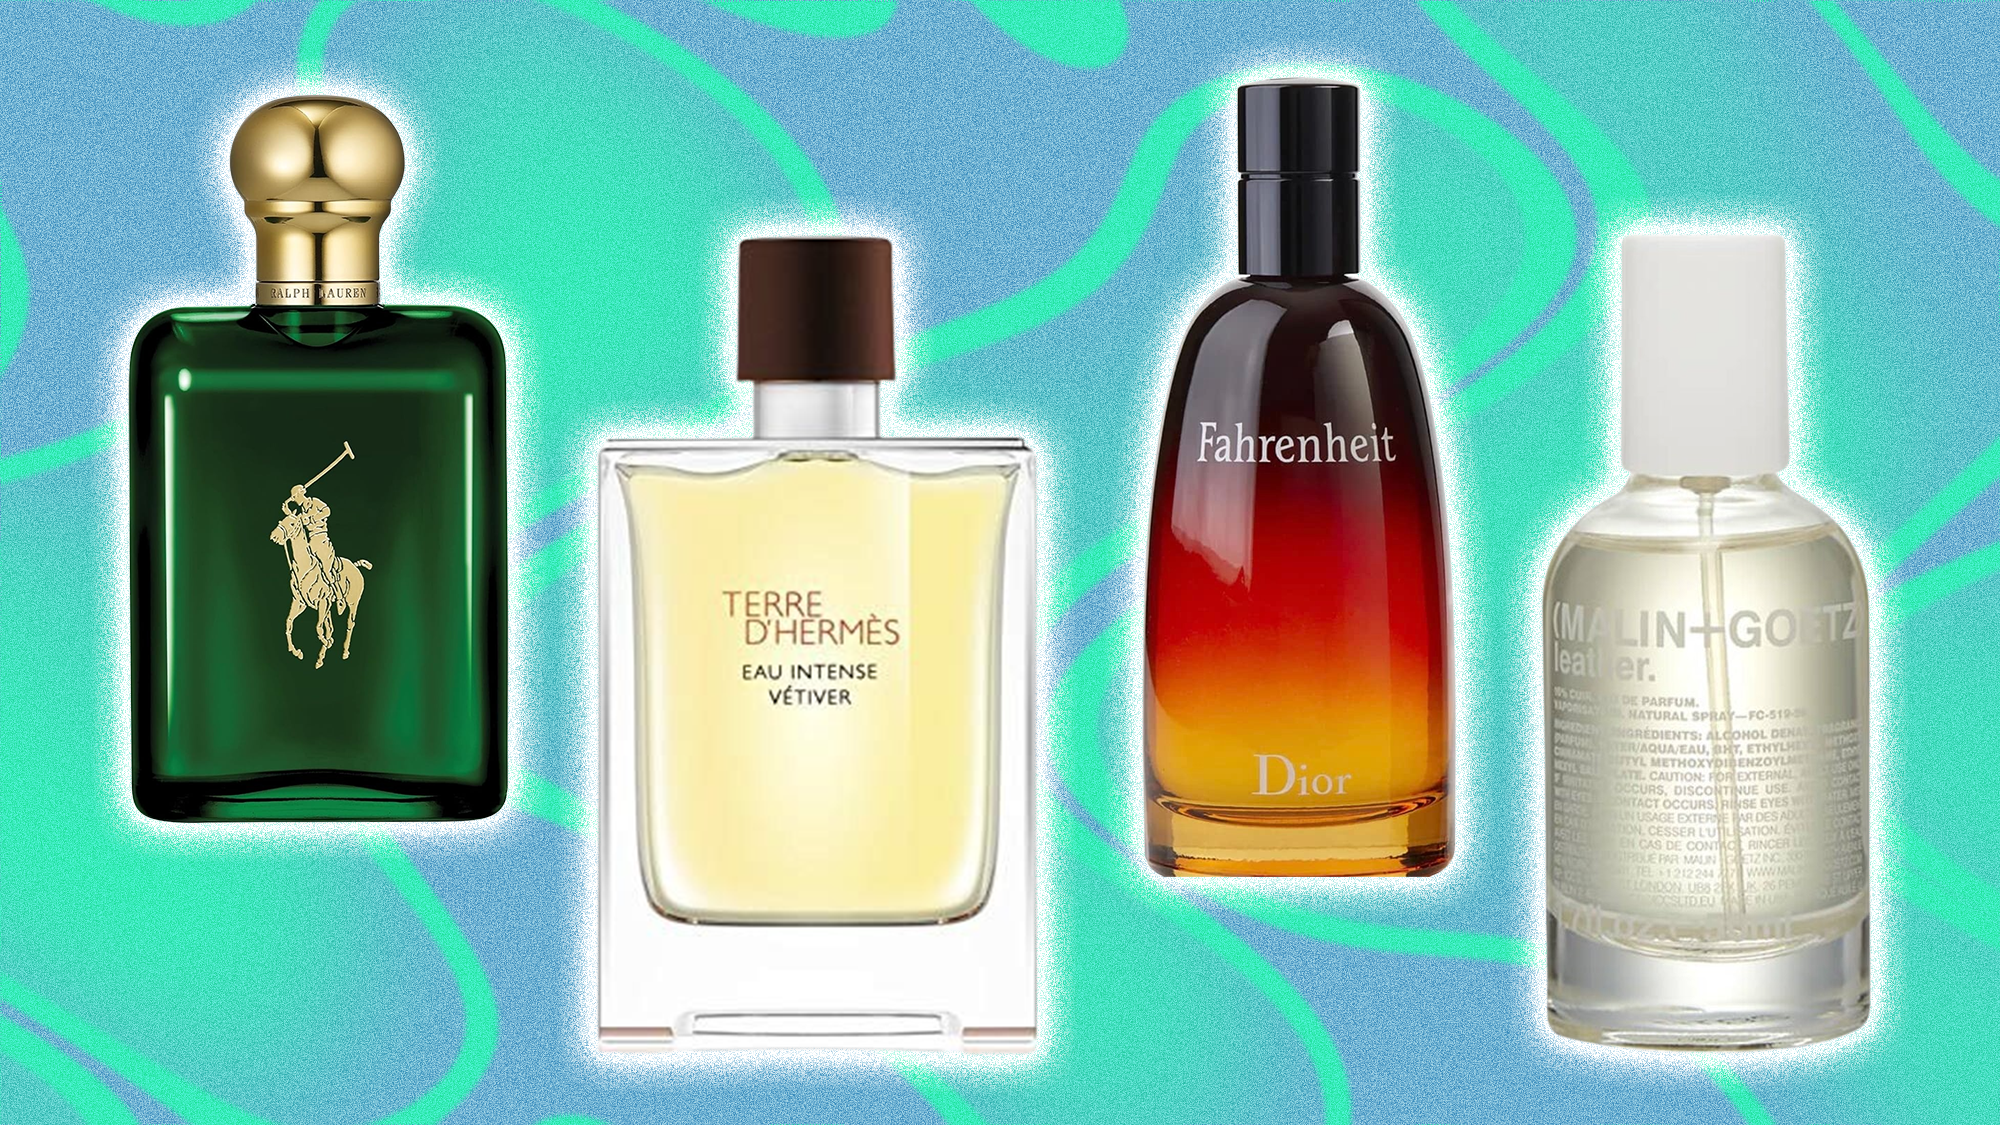 The best amazon cologne brands of 2024 according to GQ.